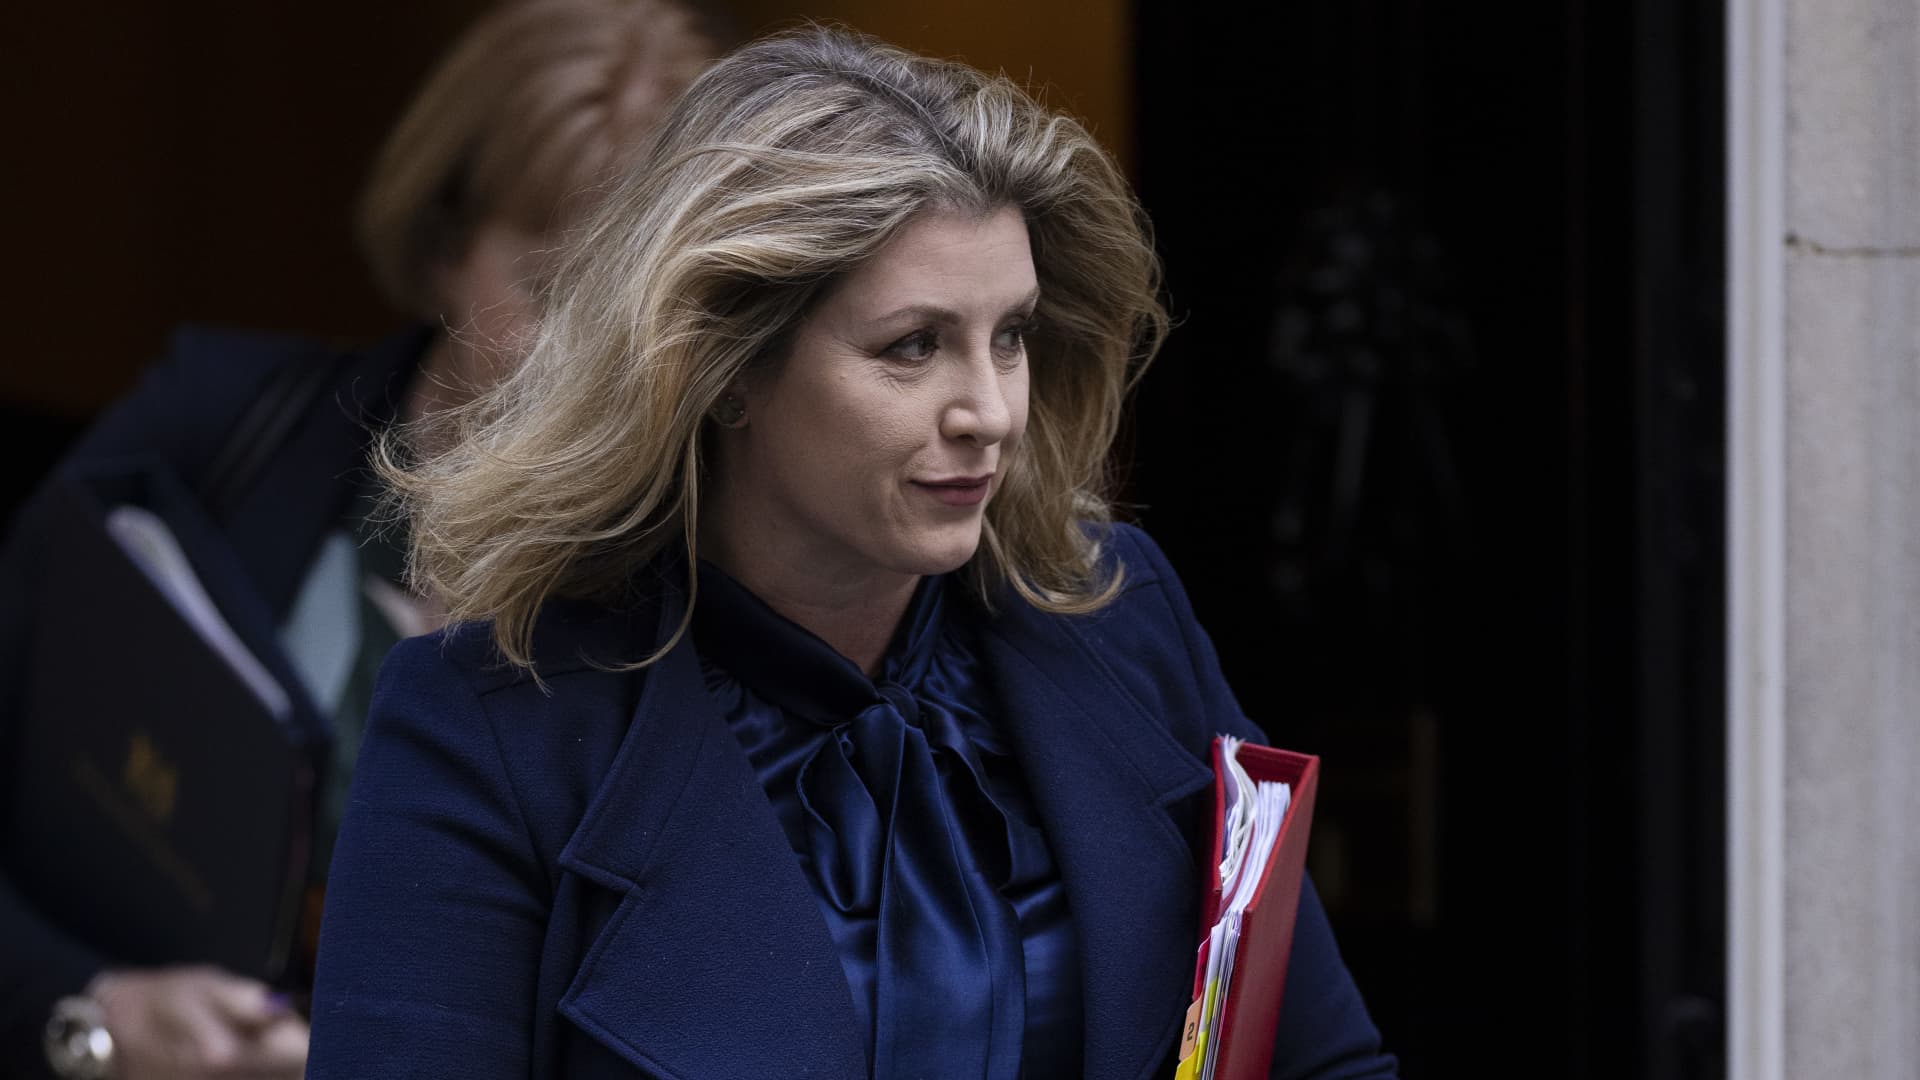 Leader of the House of Commons Penny Mordaunt is seen as a consensus candidate who could unite a splintered Conservative Party.